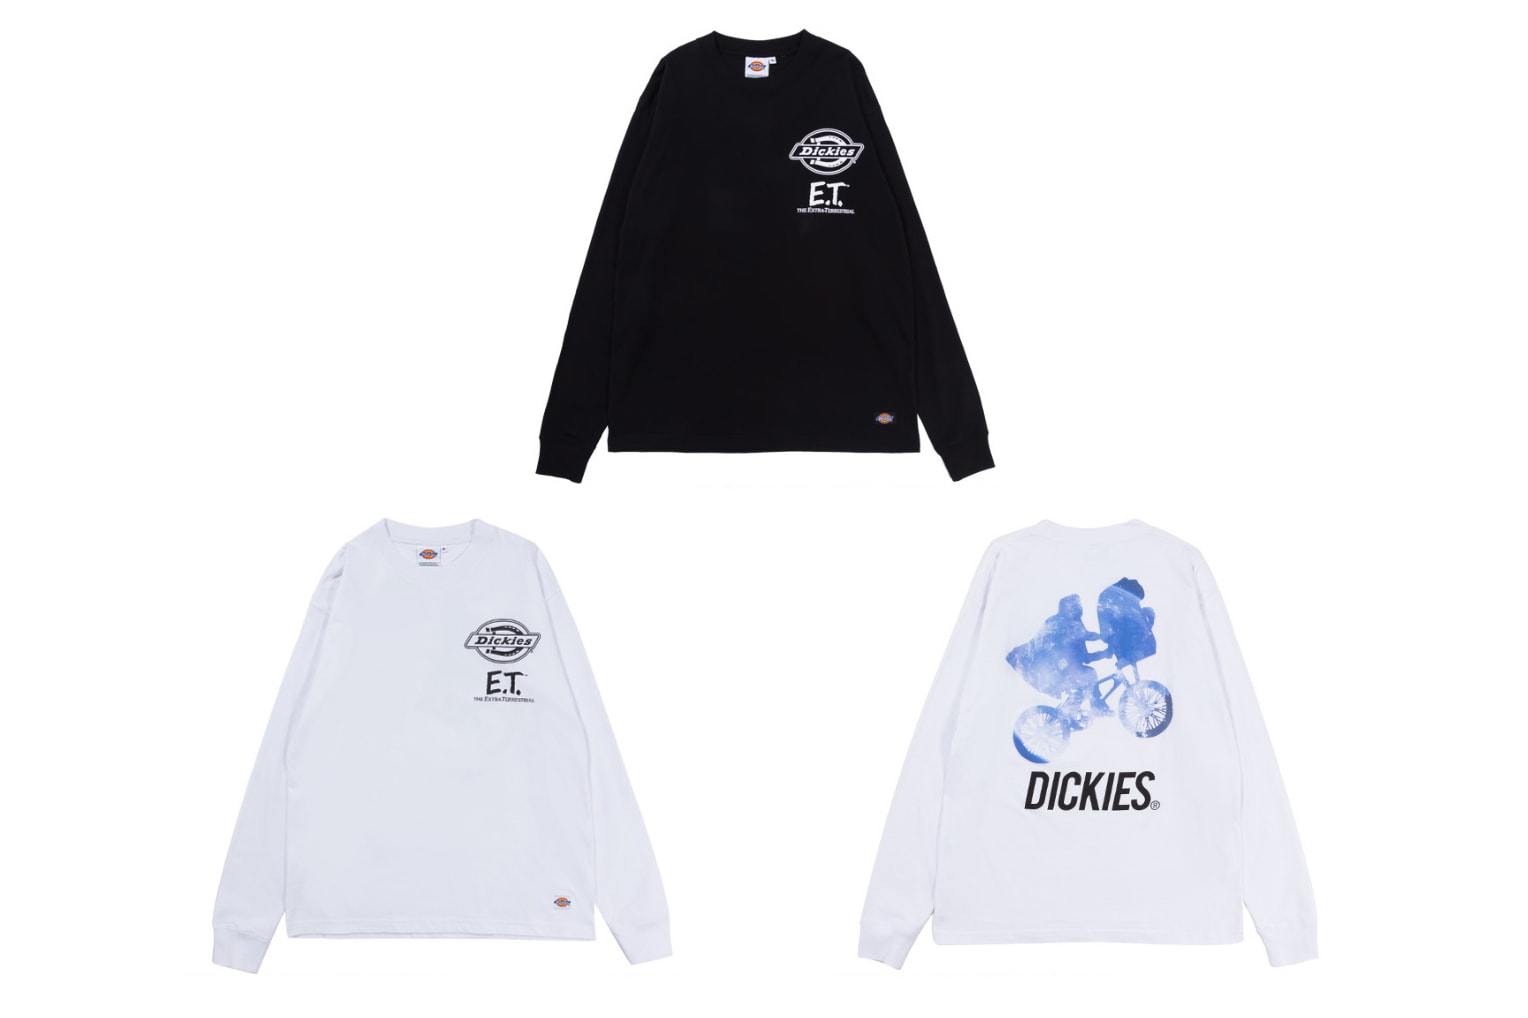 Dickies Japan 與電影《E.T. the Extra-Terrestrial》推出聯名別注系列